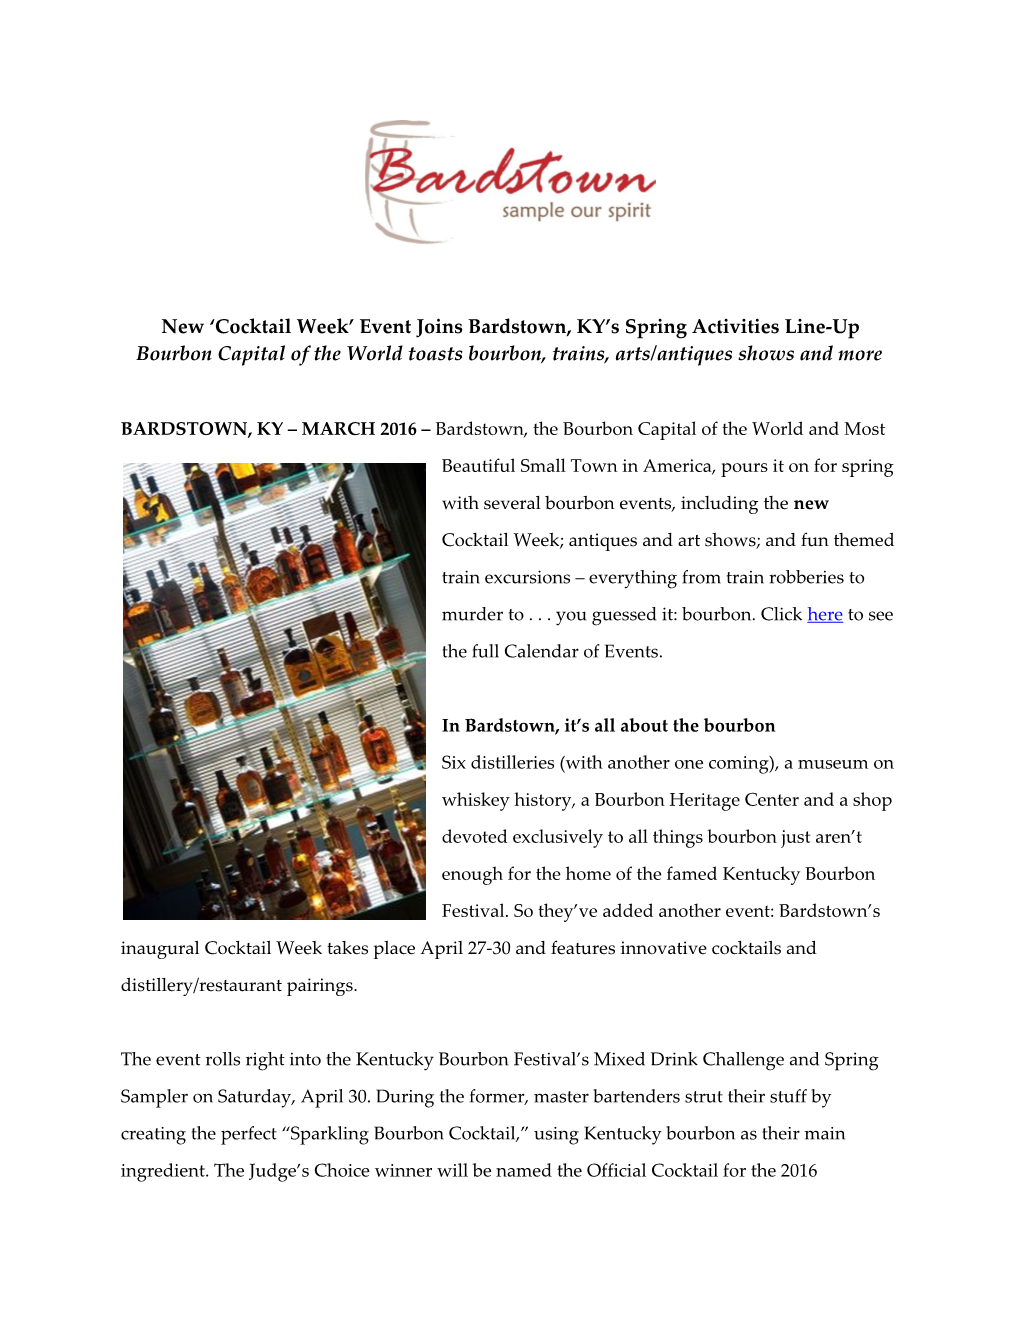 New Cocktail Week Event Joins Bardstown, KY S Spring Activities Line-Up